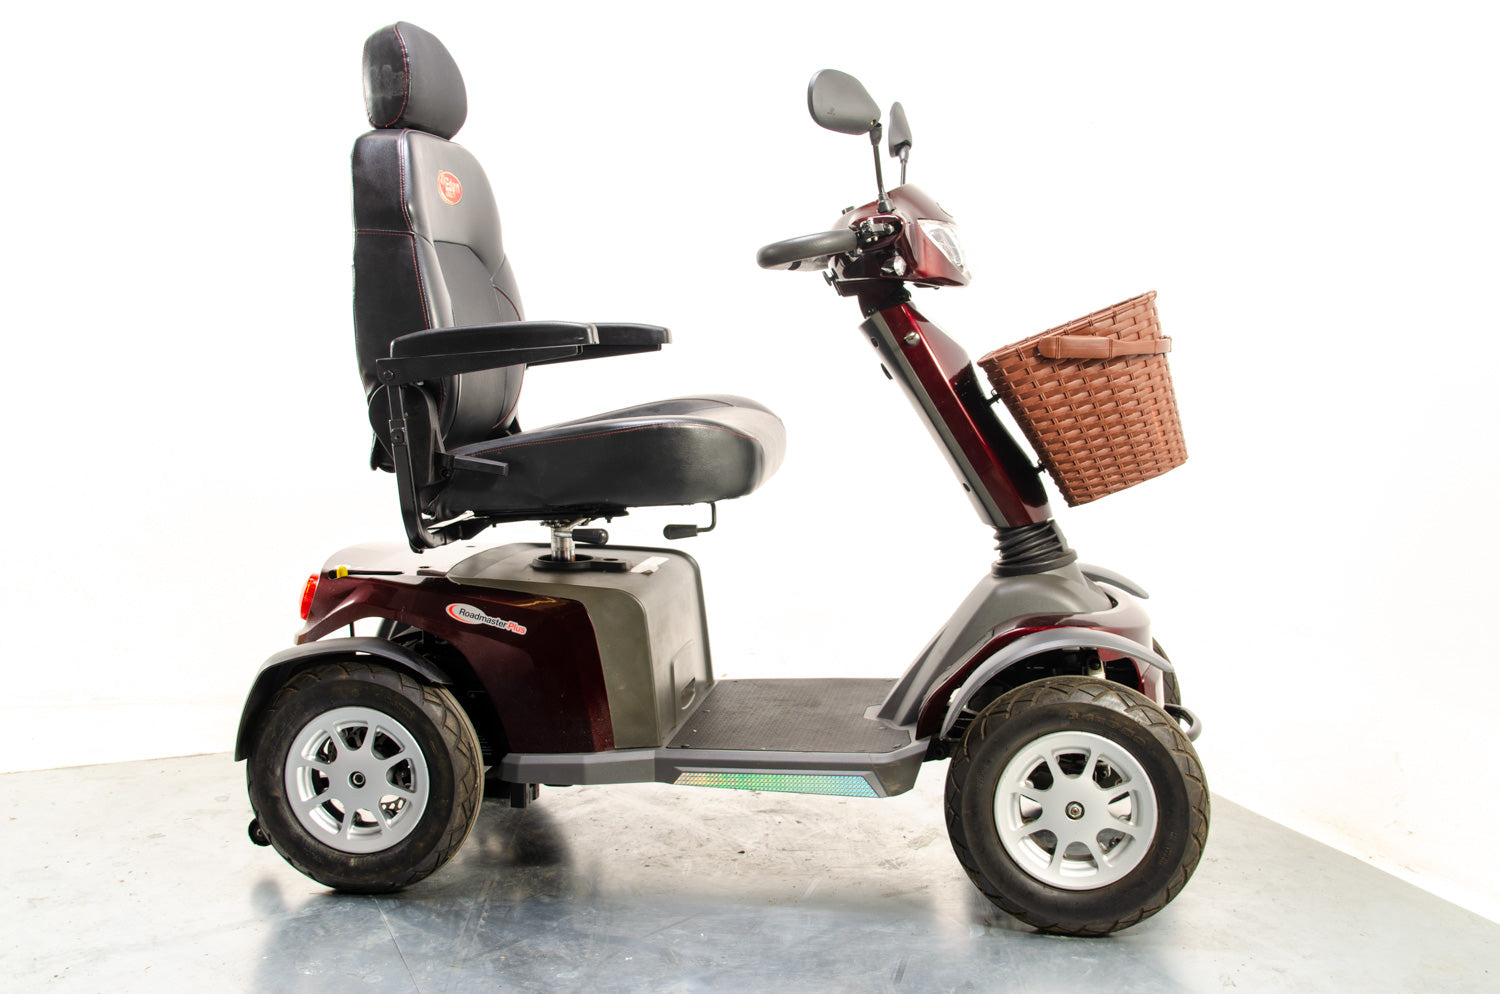 Eden Roadmaster Plus All-Terrain Off-Road Used Mobility Scooter 8mph Luxury Electric Large 13603